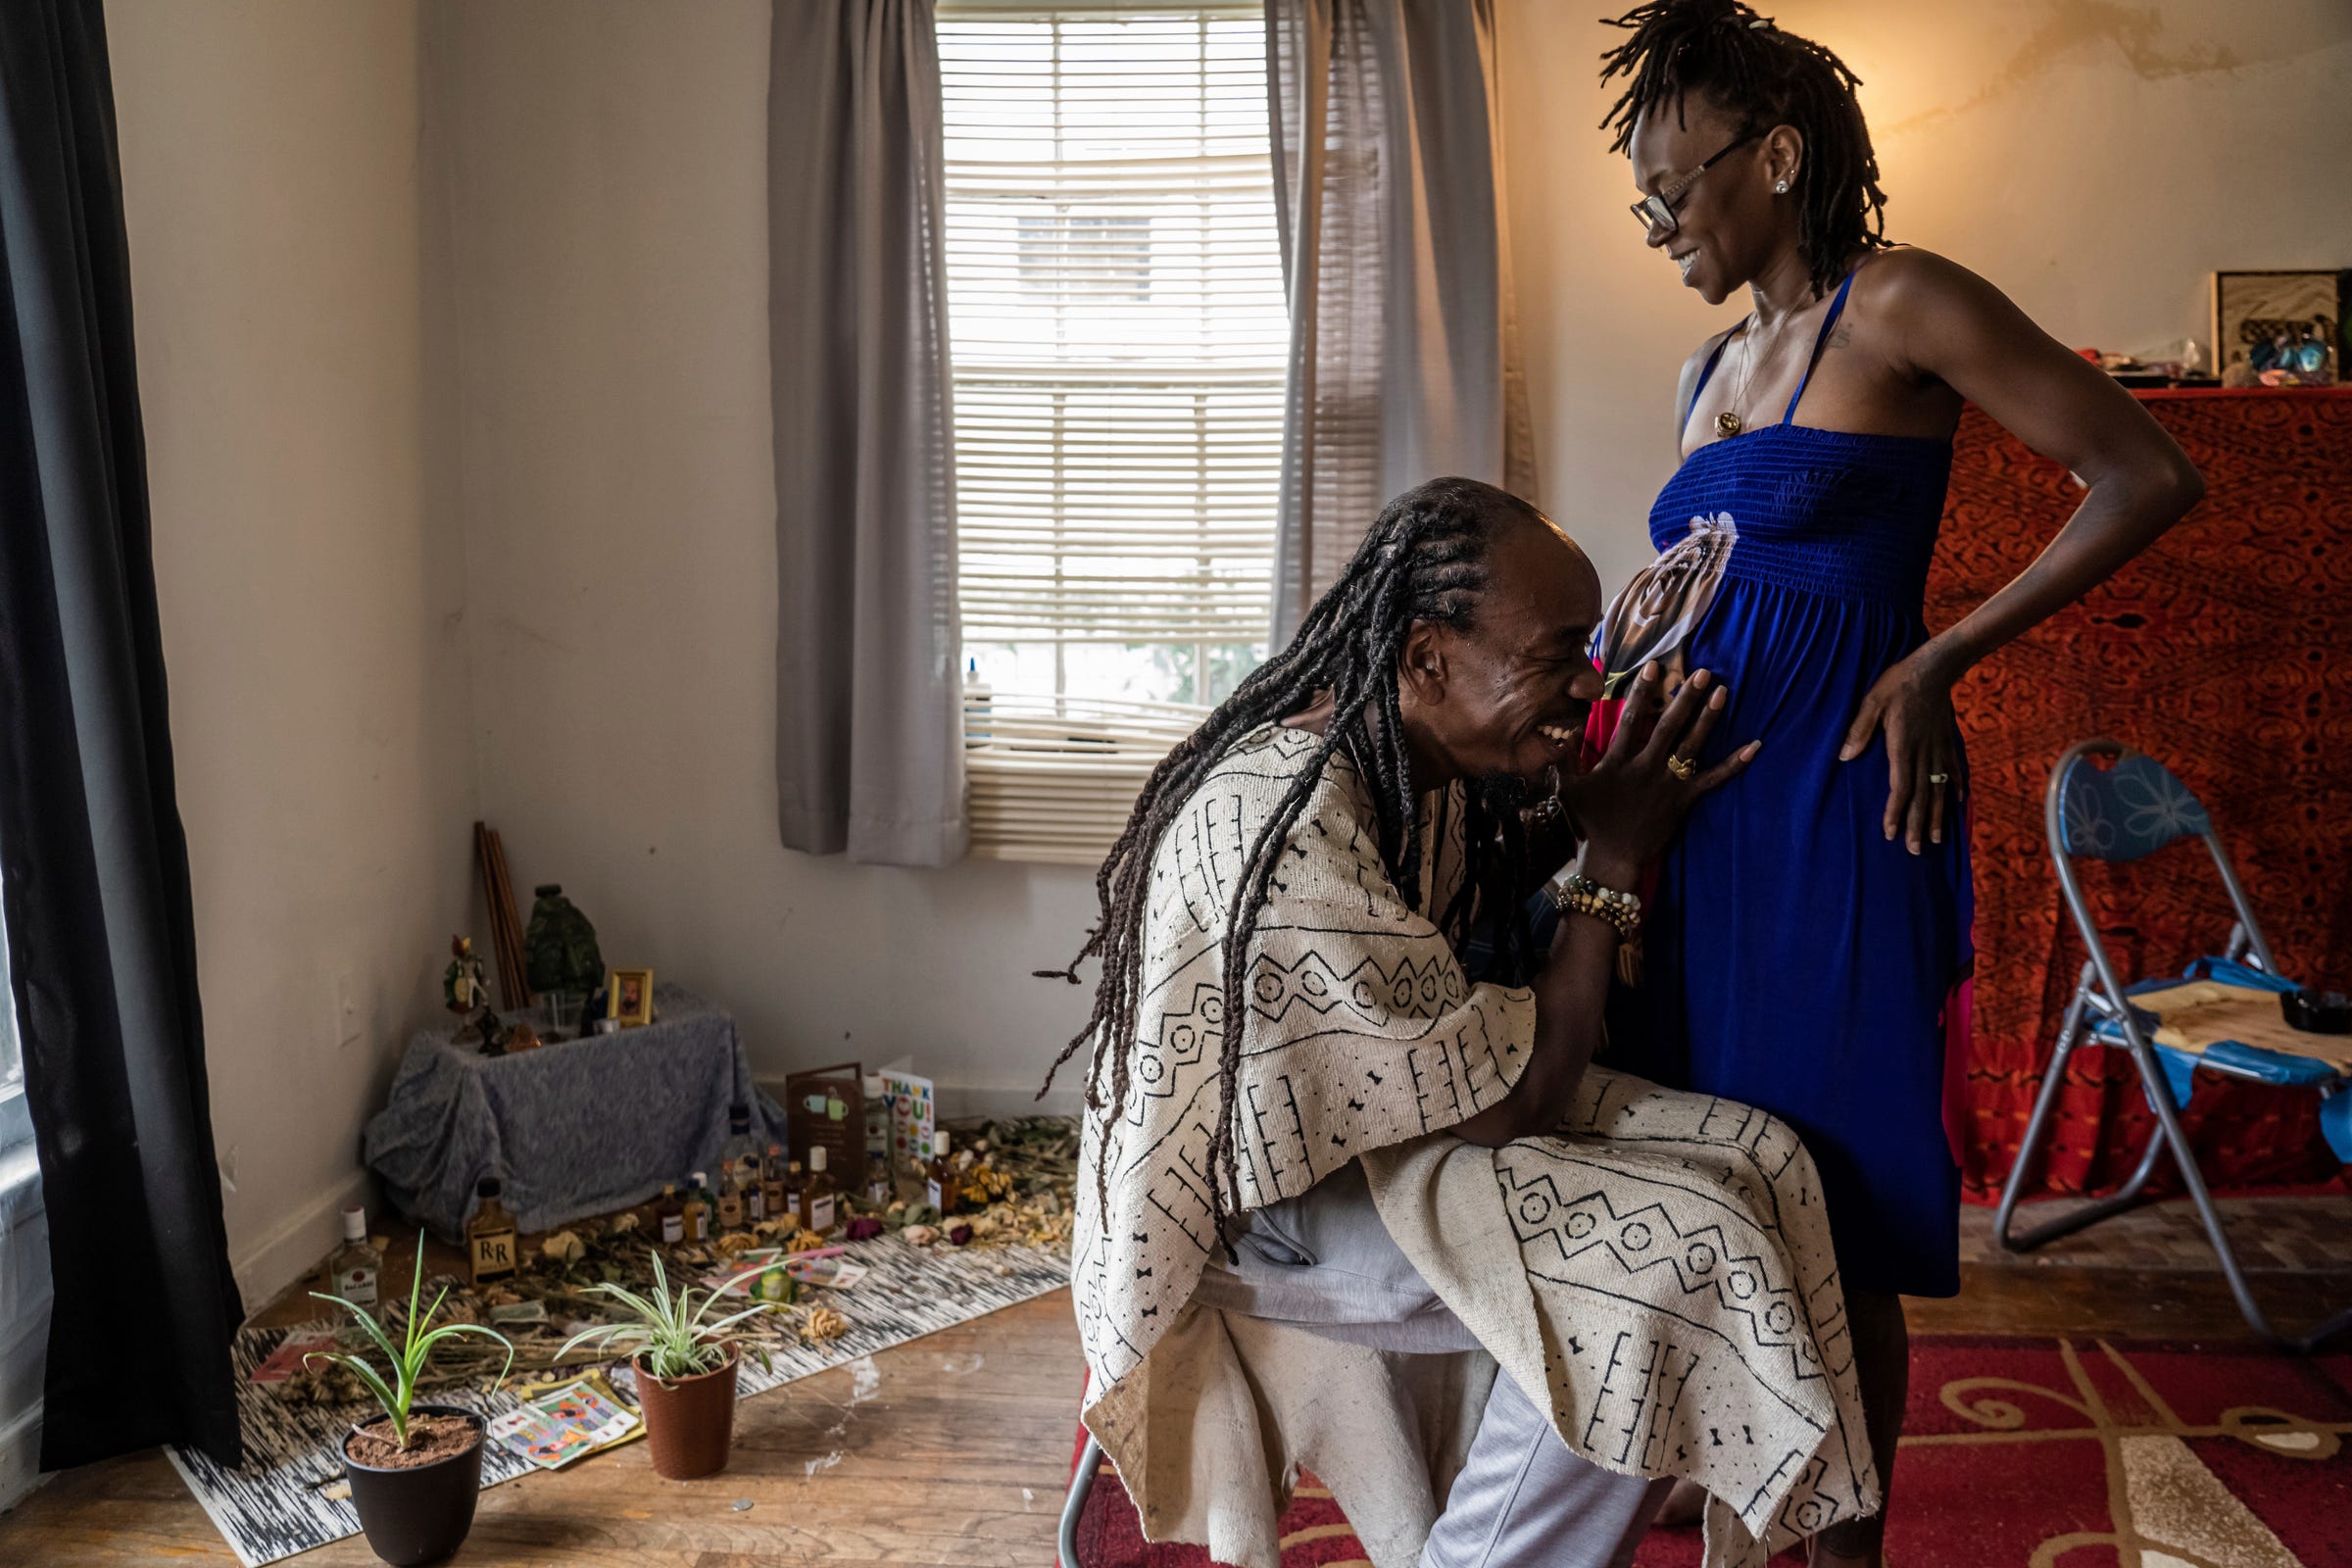 Psychonaut Academy of Detroit founder Sincere Seven, 43, touches the stomach of a pregnant Ifechi Genesis, 35, of Detroit, at the Psychonaut Academy of Detroit on Thursday, July 13, 2022.